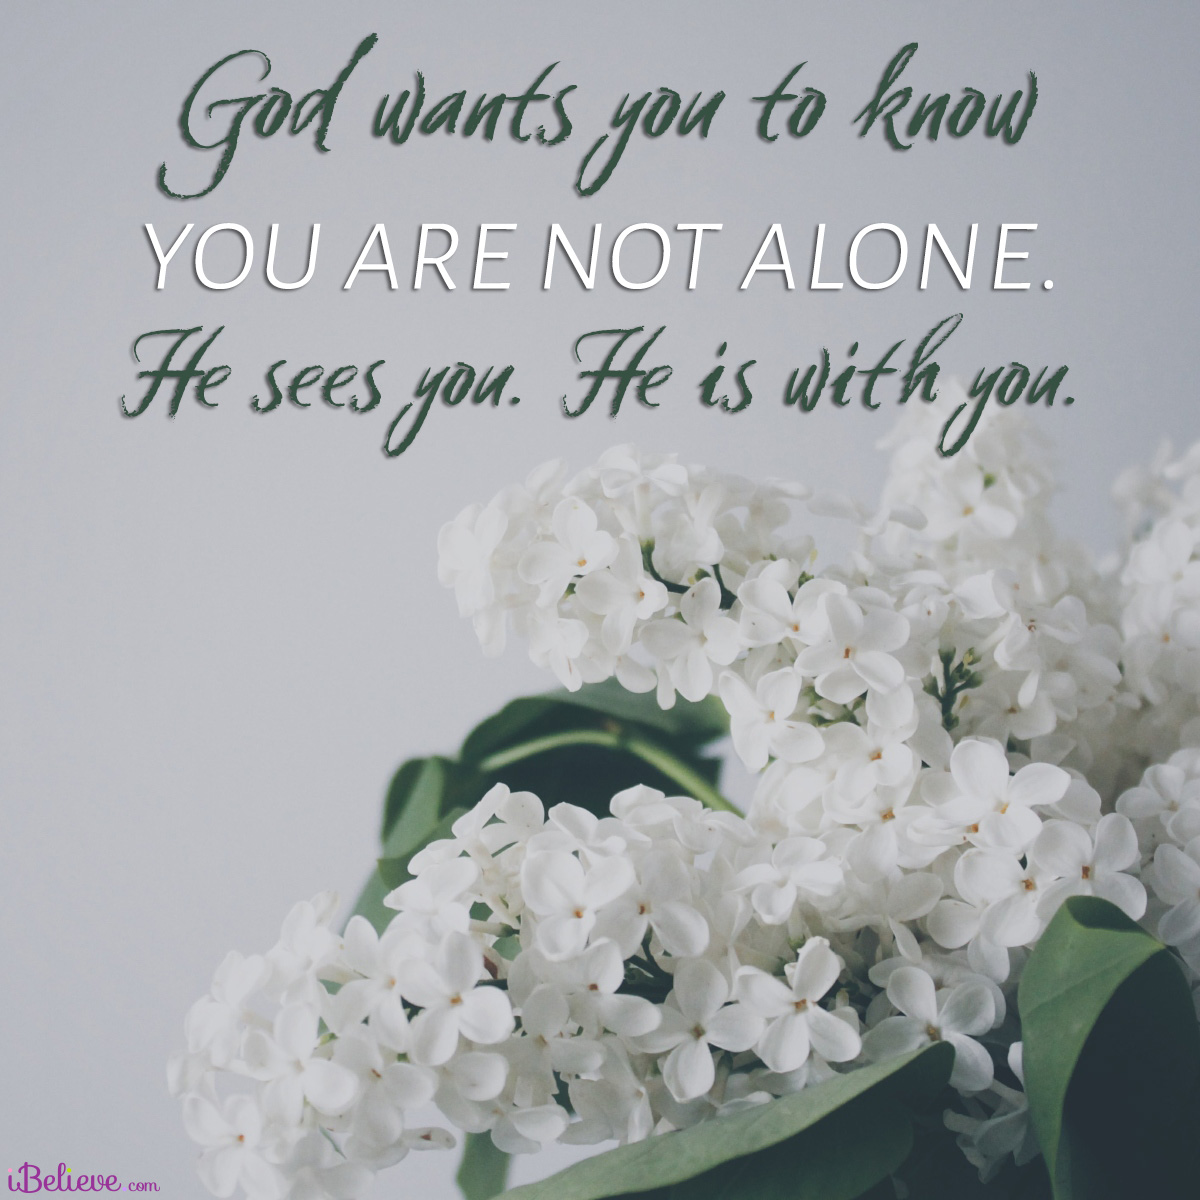 You are not alone; inspirational image